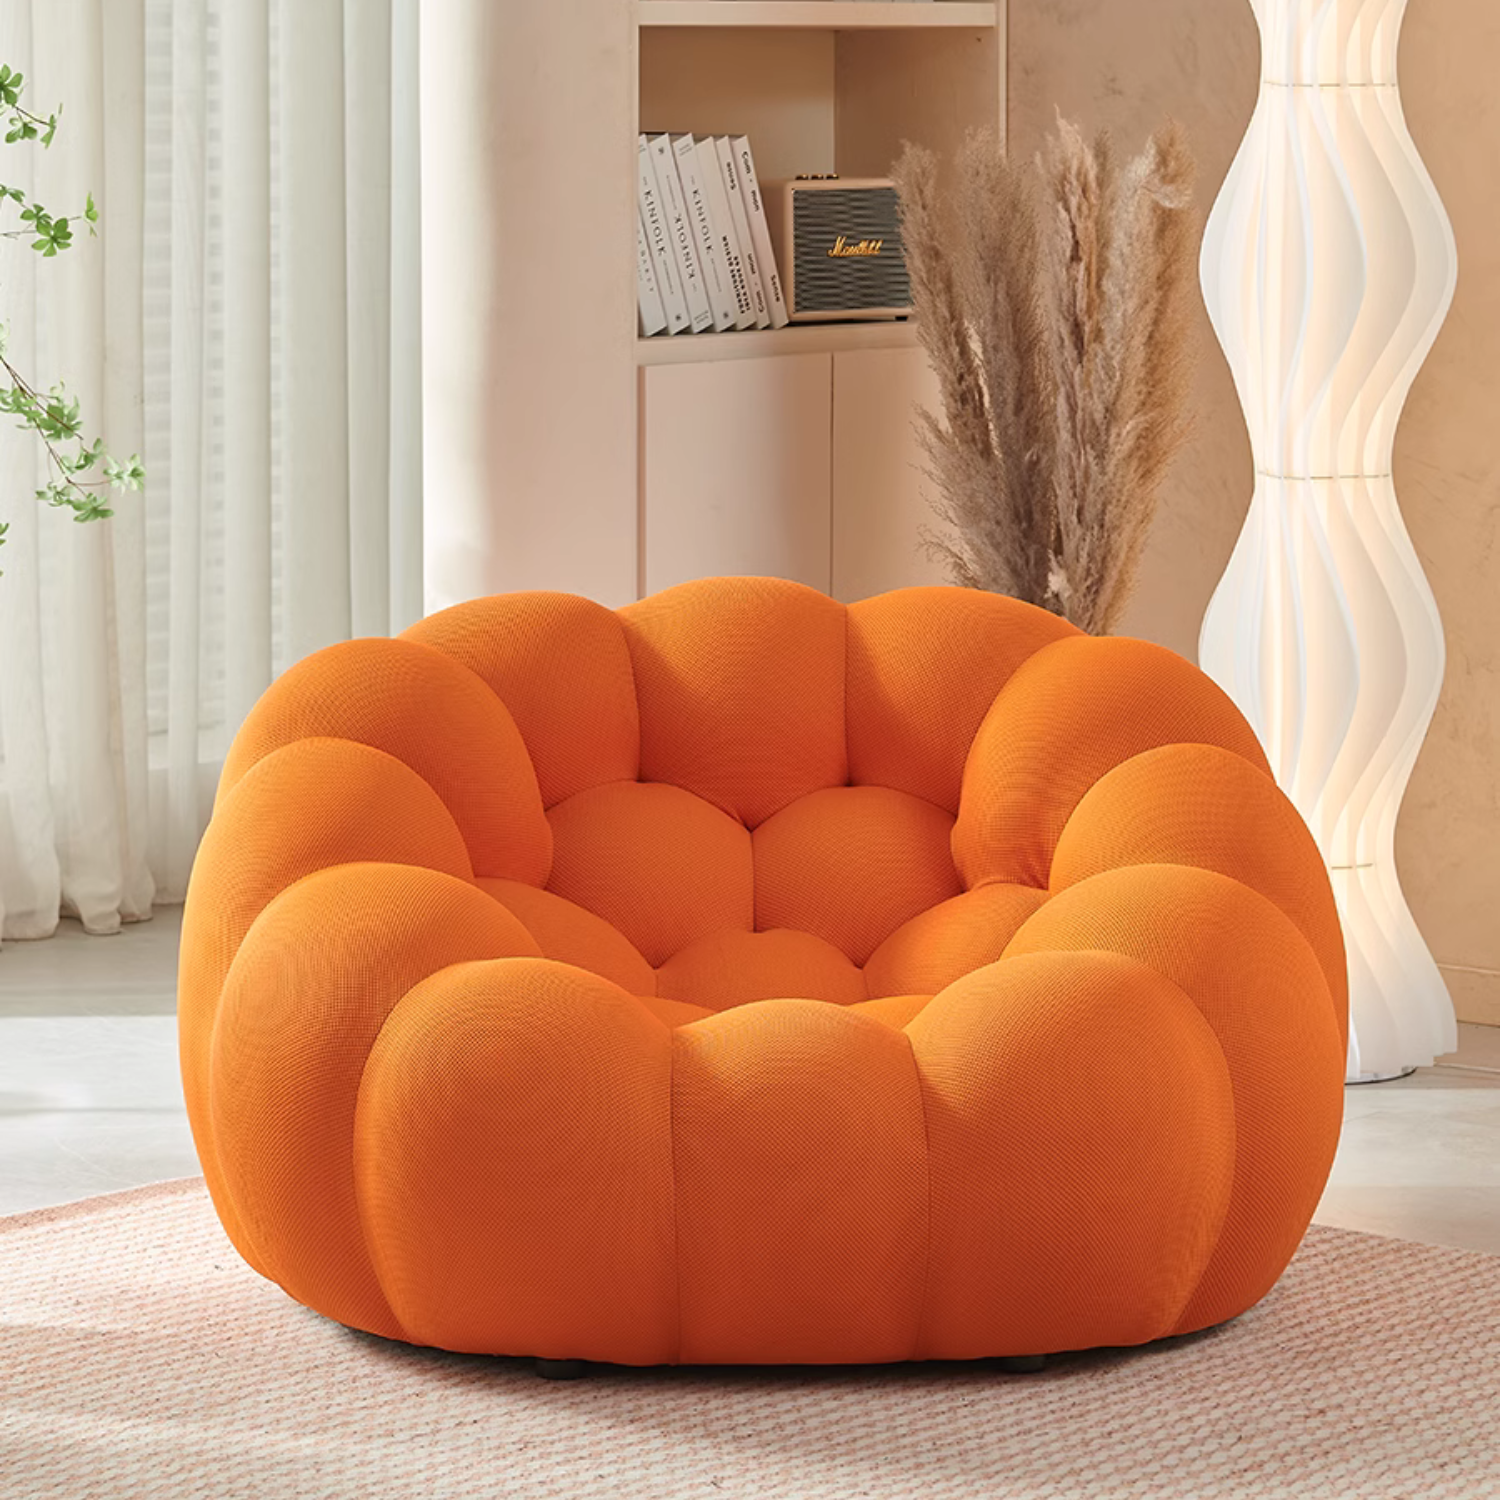 The Best Comfortable Living Room Chairs for Ultimate Relaxation